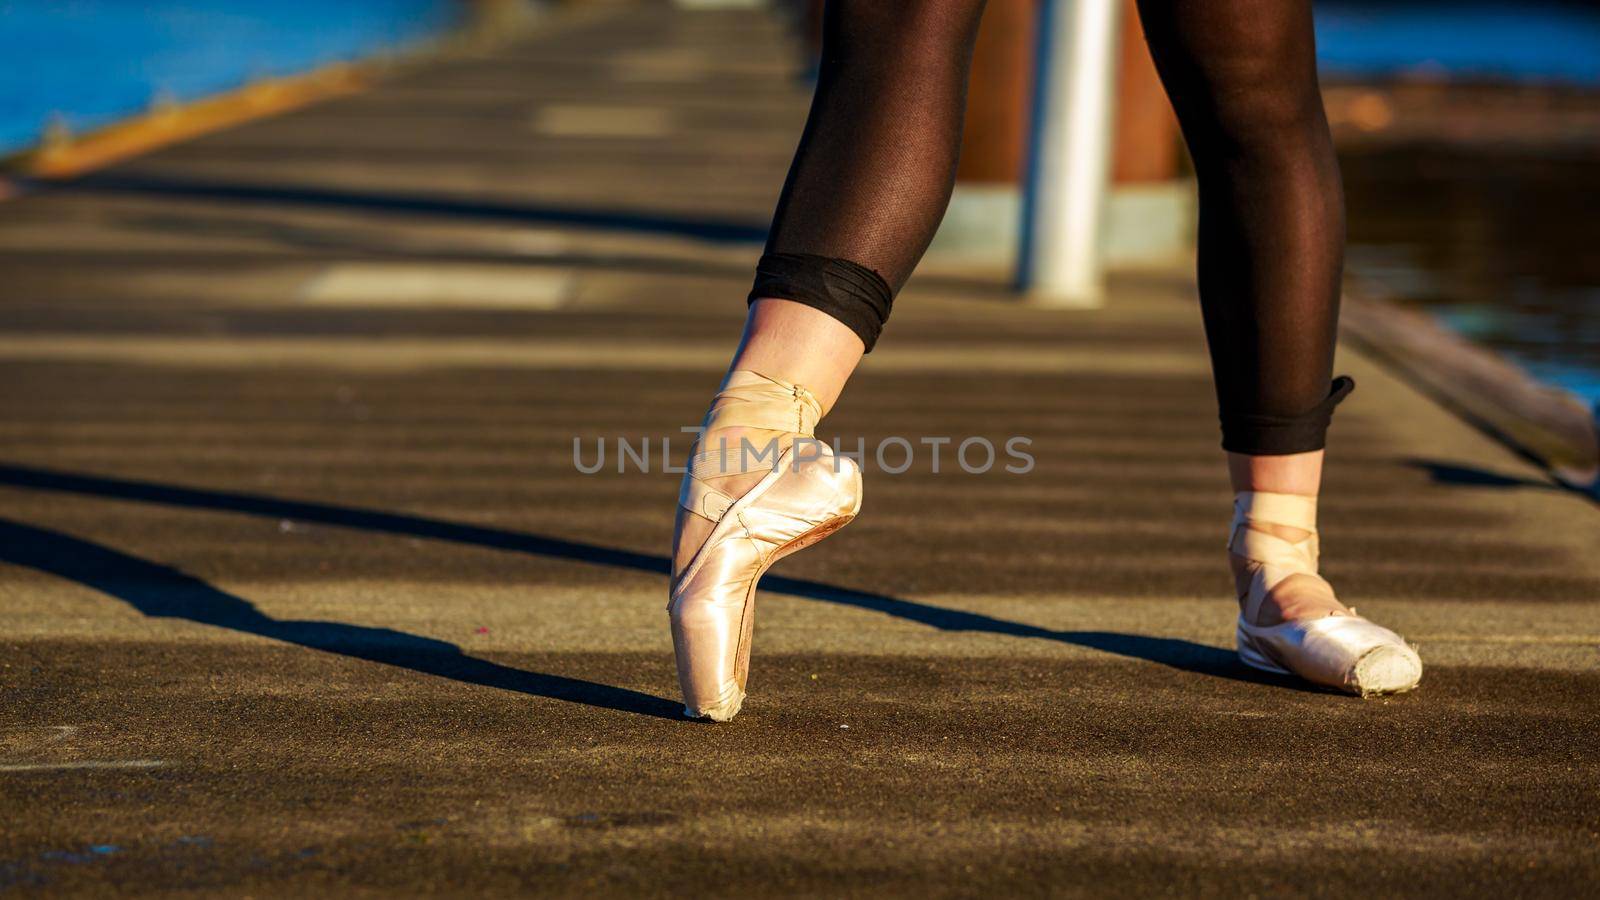 Young female ballet dancer practices at waterfront, Portland downtown.